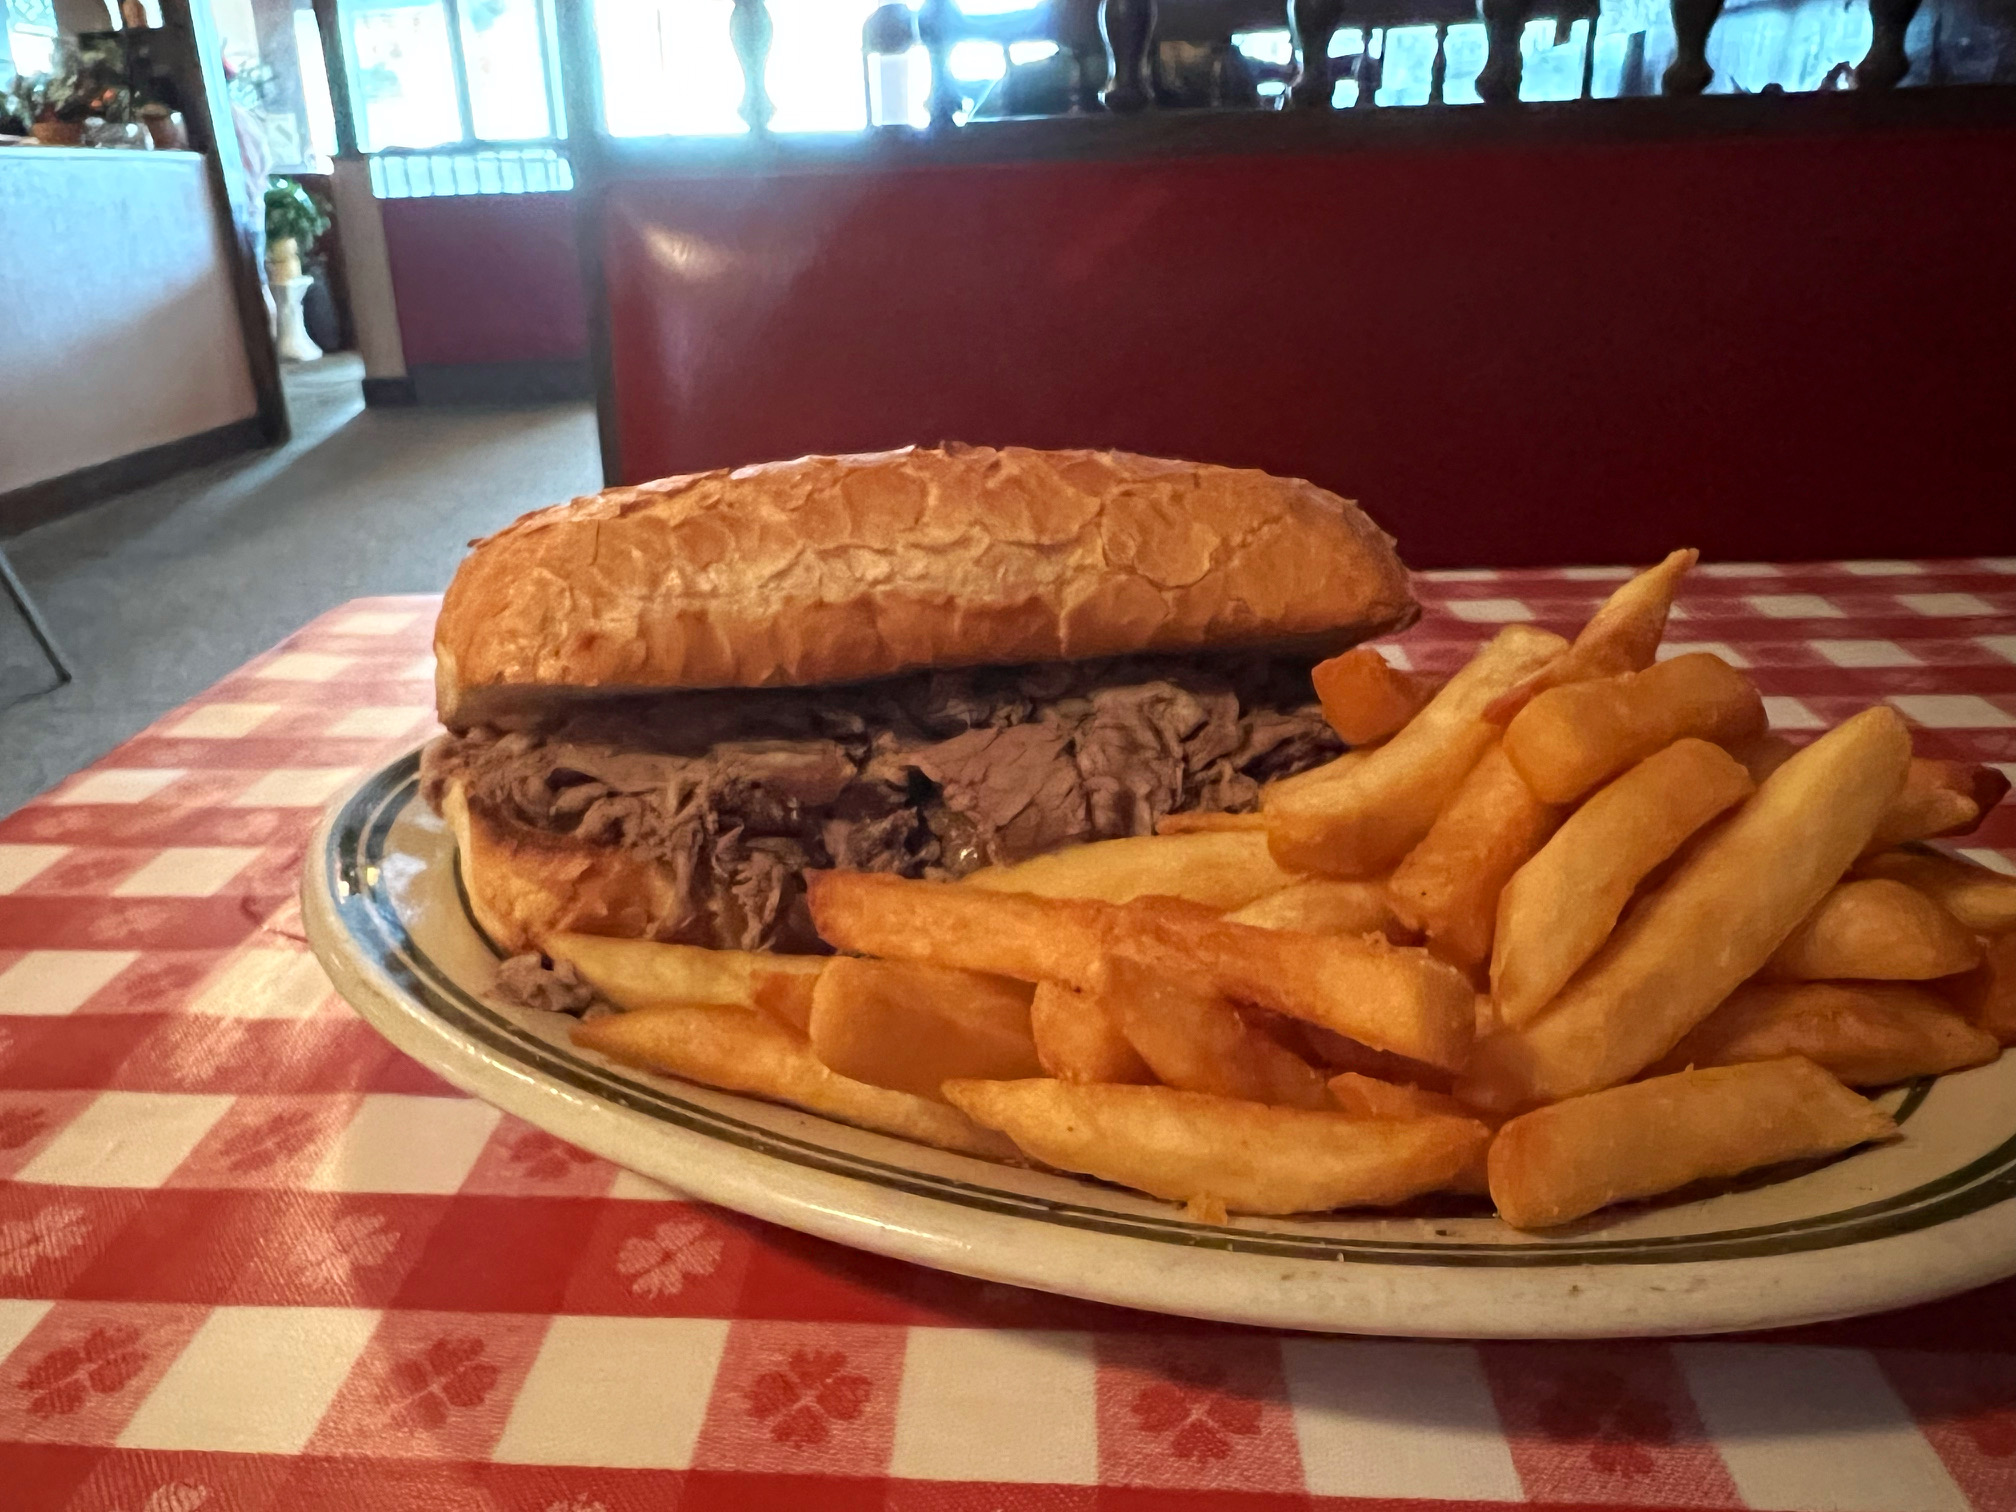 On a red-and-white checkered tablecloth, there is an oval plate with an Italian beef and fries on it. Photo by Alyssa Buckley.